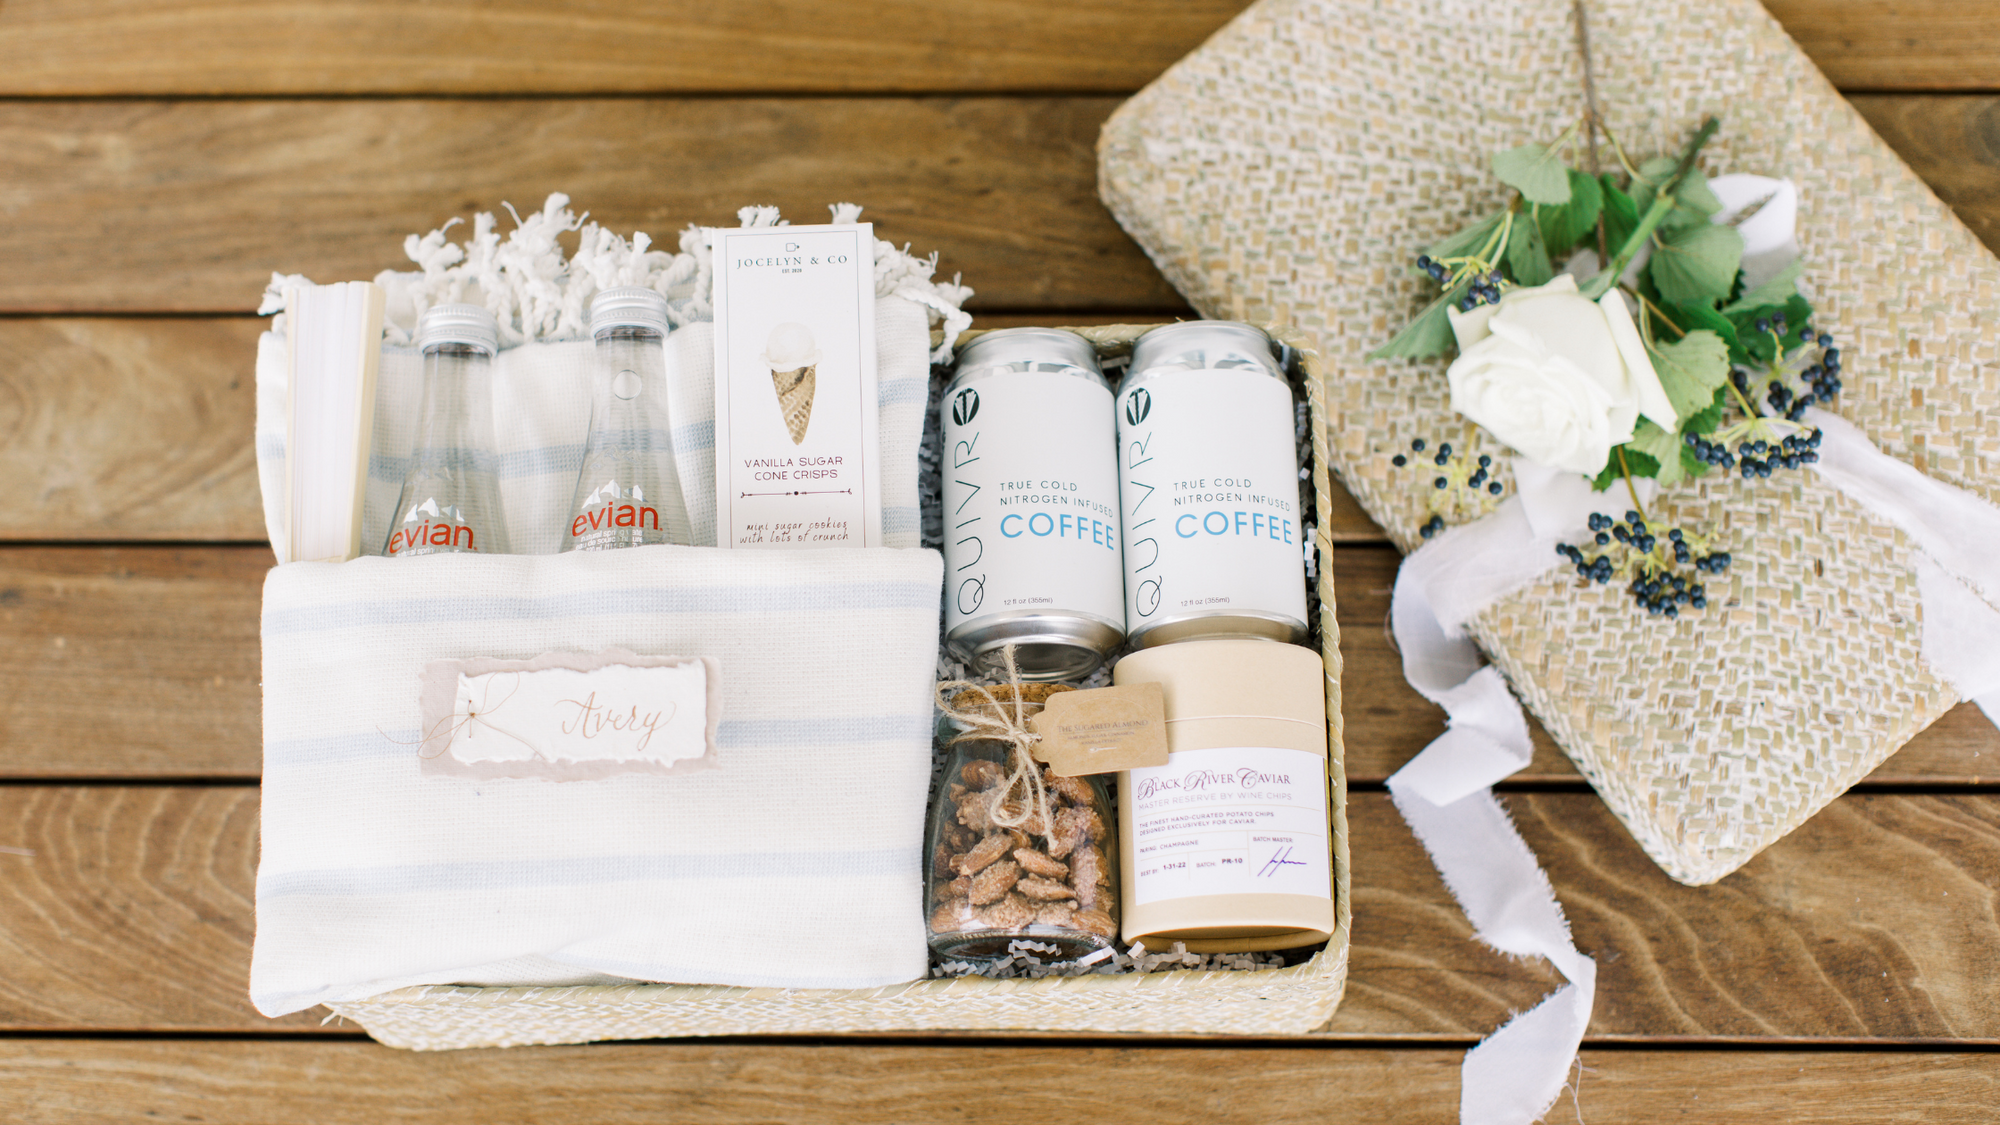 wedding welcome gift bags and boxes for your hotel guests! This beach inspired wedding welcome gifts includes a beach towel, evian water, cold brew coffee, almonds, gourmet chips and beautiful packaging!